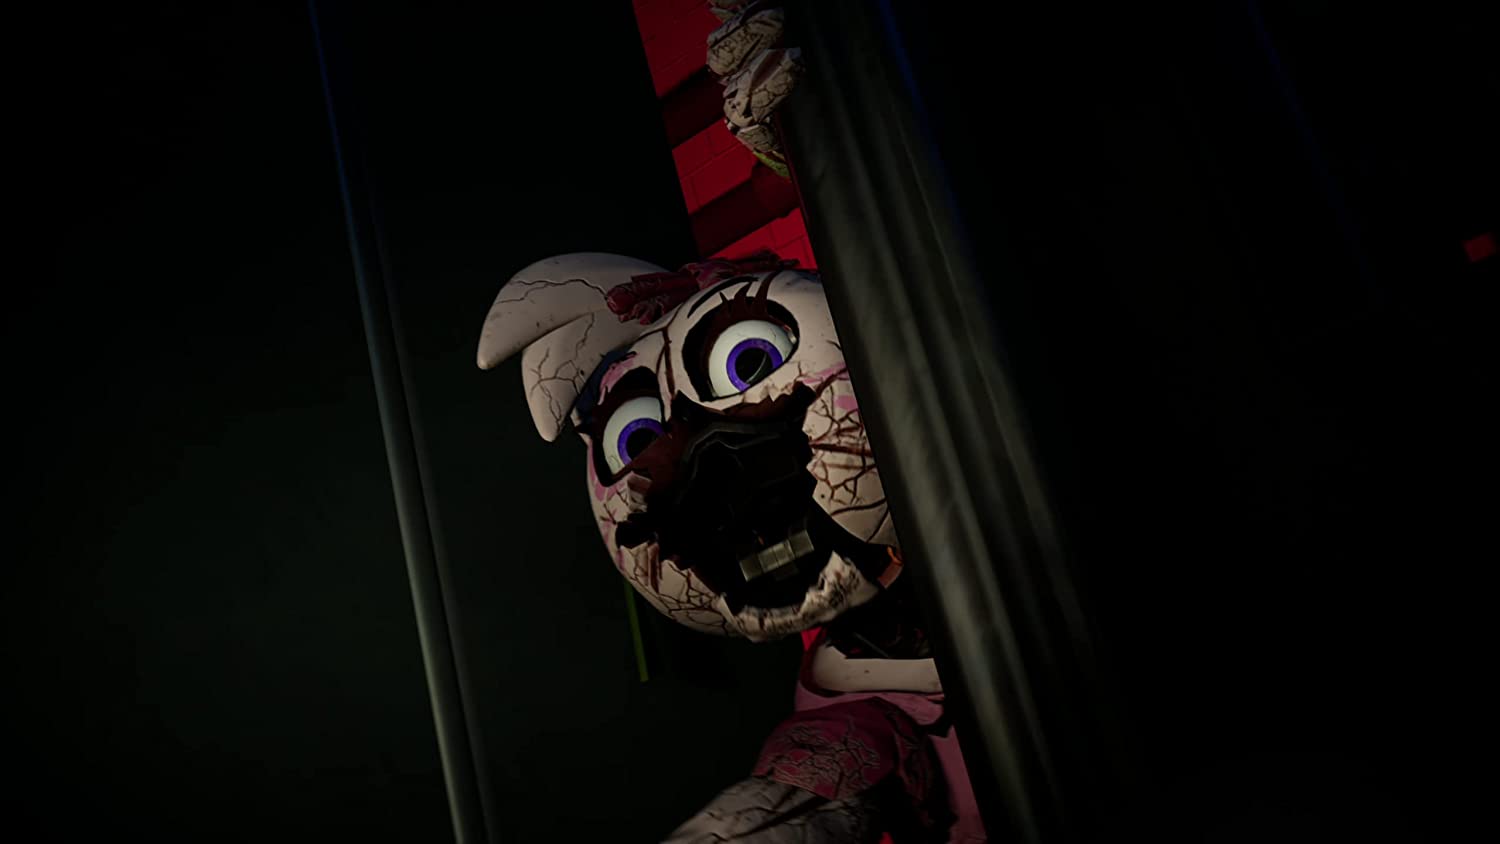 VANNY QUER COZINHAR GREGORY do Five Nights at Freddy's: Security